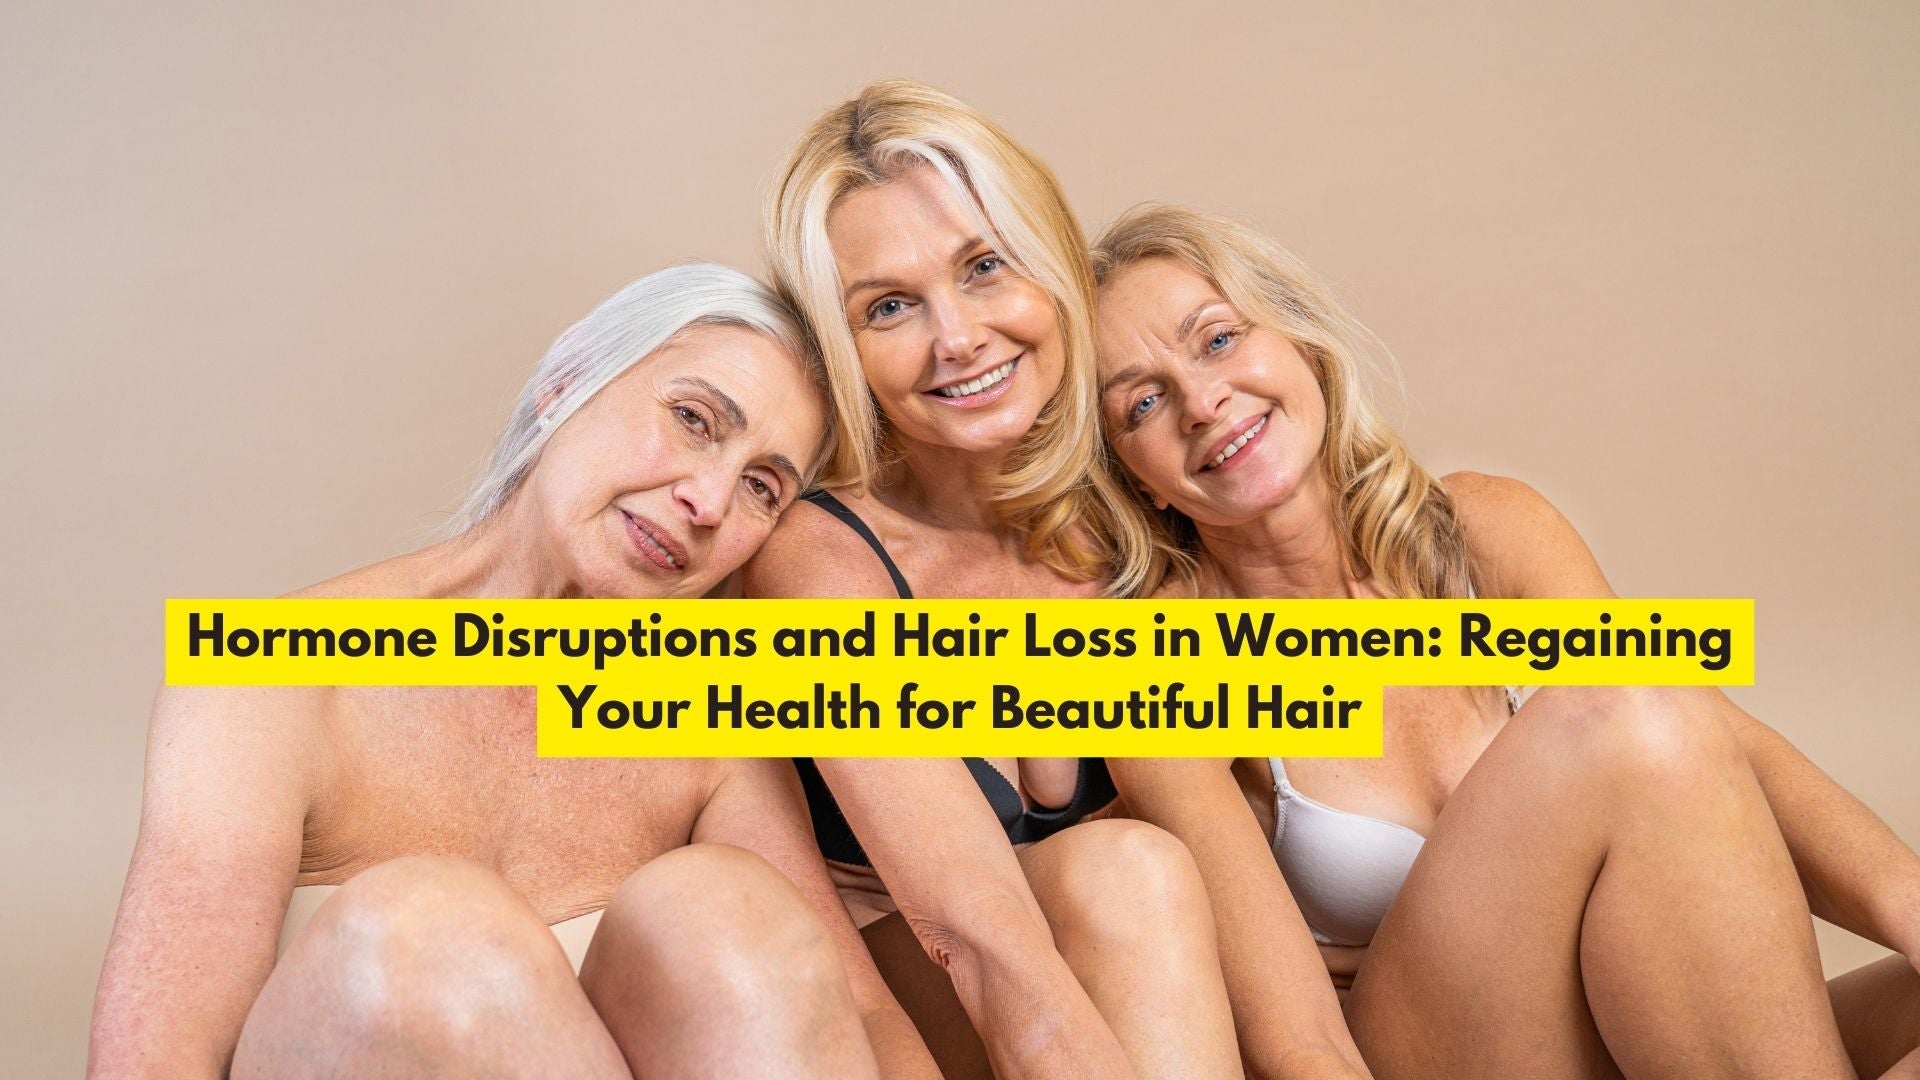 Hormone Disruptions and Hair Loss in Women: Regaining Your Health for Beautiful Hair